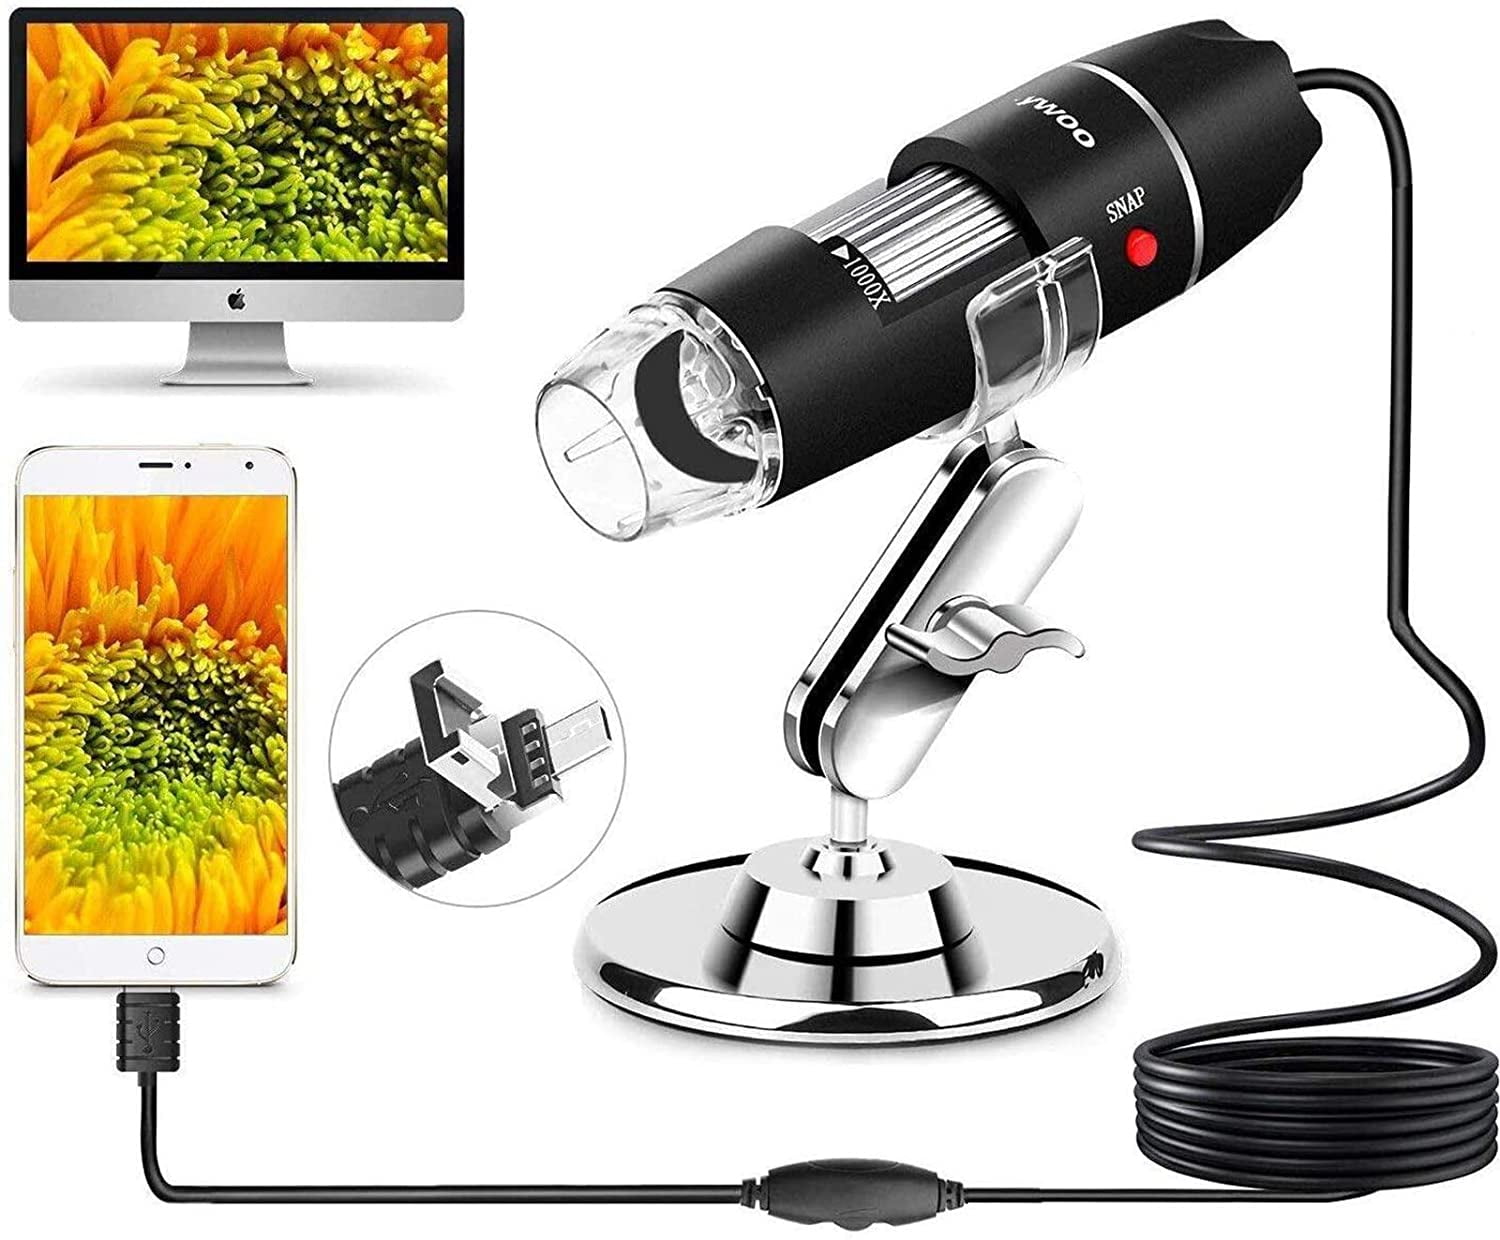 USB Microscope,1000 x High Resolution Digital Mini Microscope Camera with OTG Adapter and Metal Stand,Compatible for Micro USB Type-C Android Windows Mac Linux 